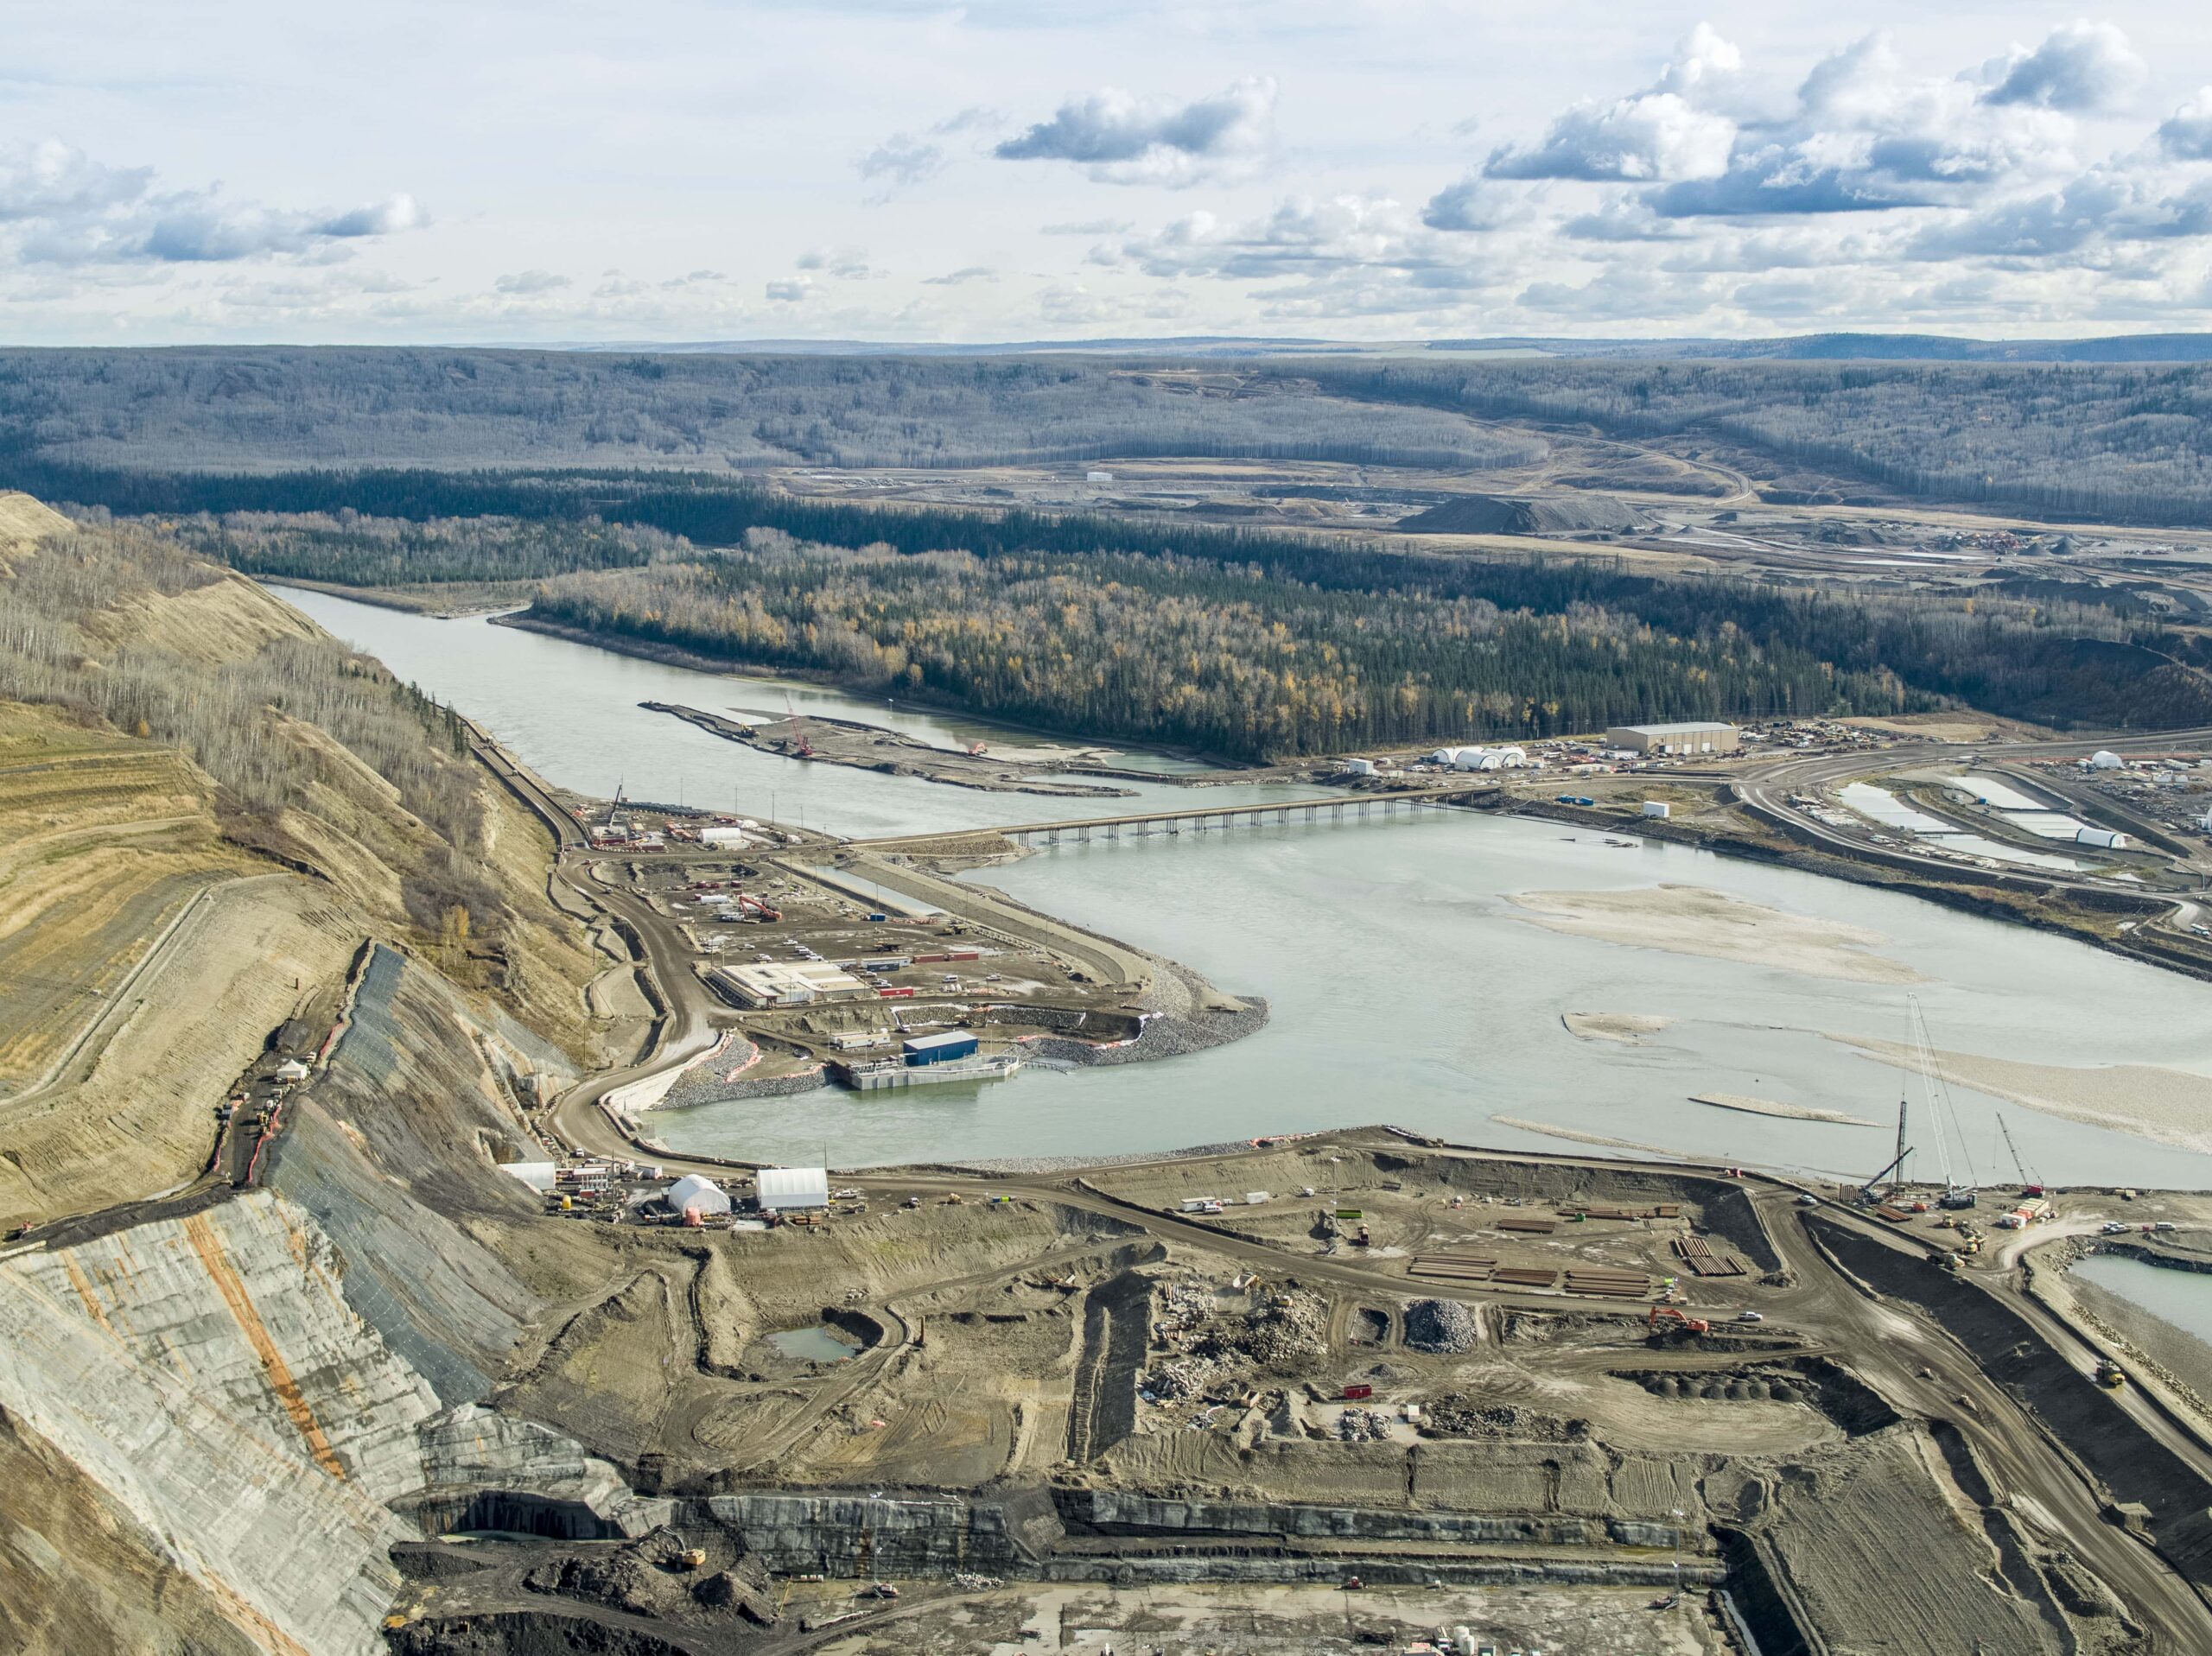 An overhead view of BC Hydro Site C dam construction along the Peace River. Power from the dam could support an LNG Canada expansion